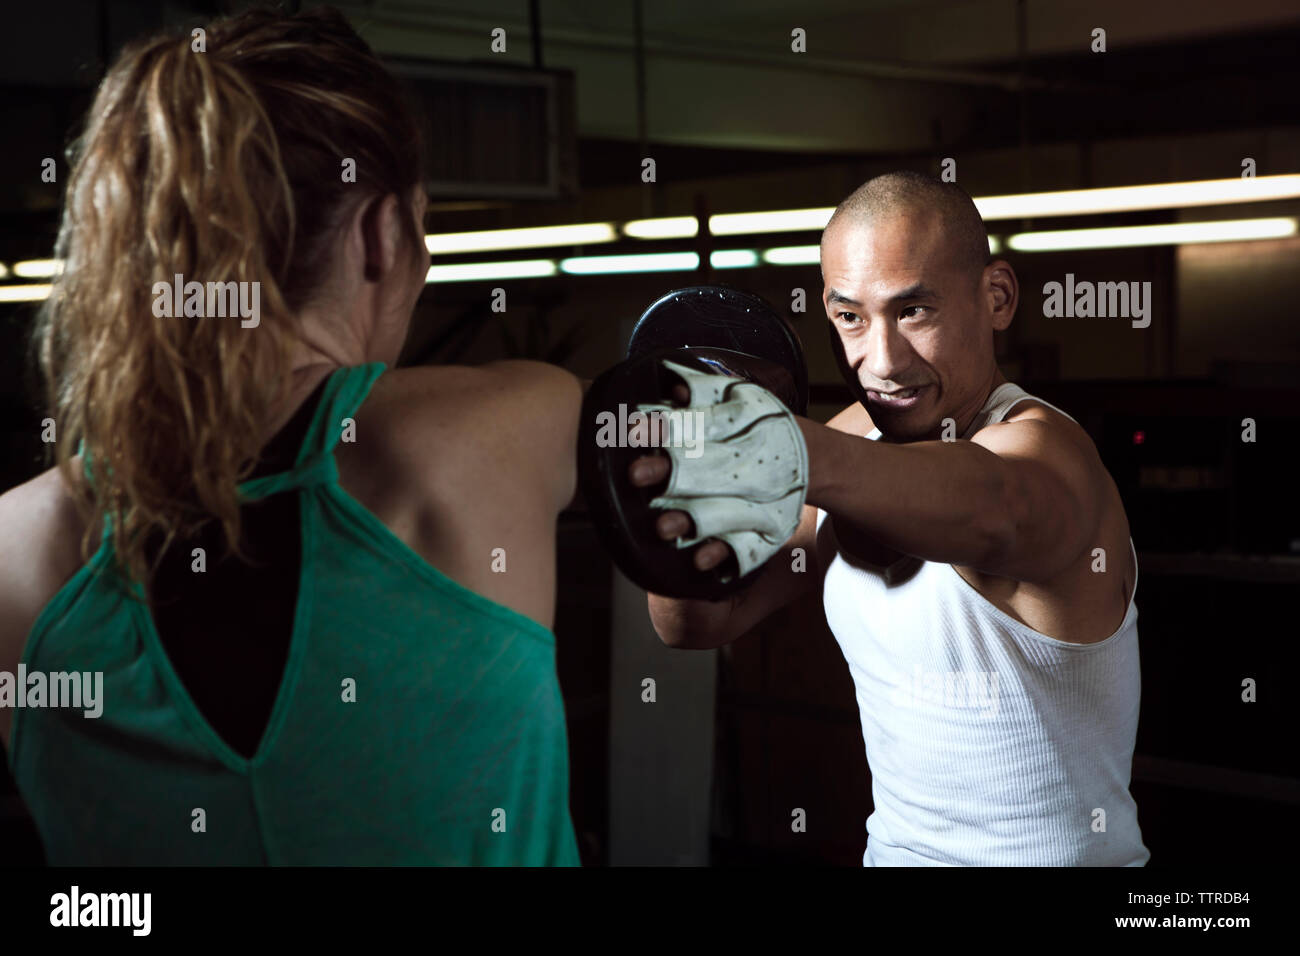 Smiling trainer assisting female boxer in boxing ring at gym Stock Photo